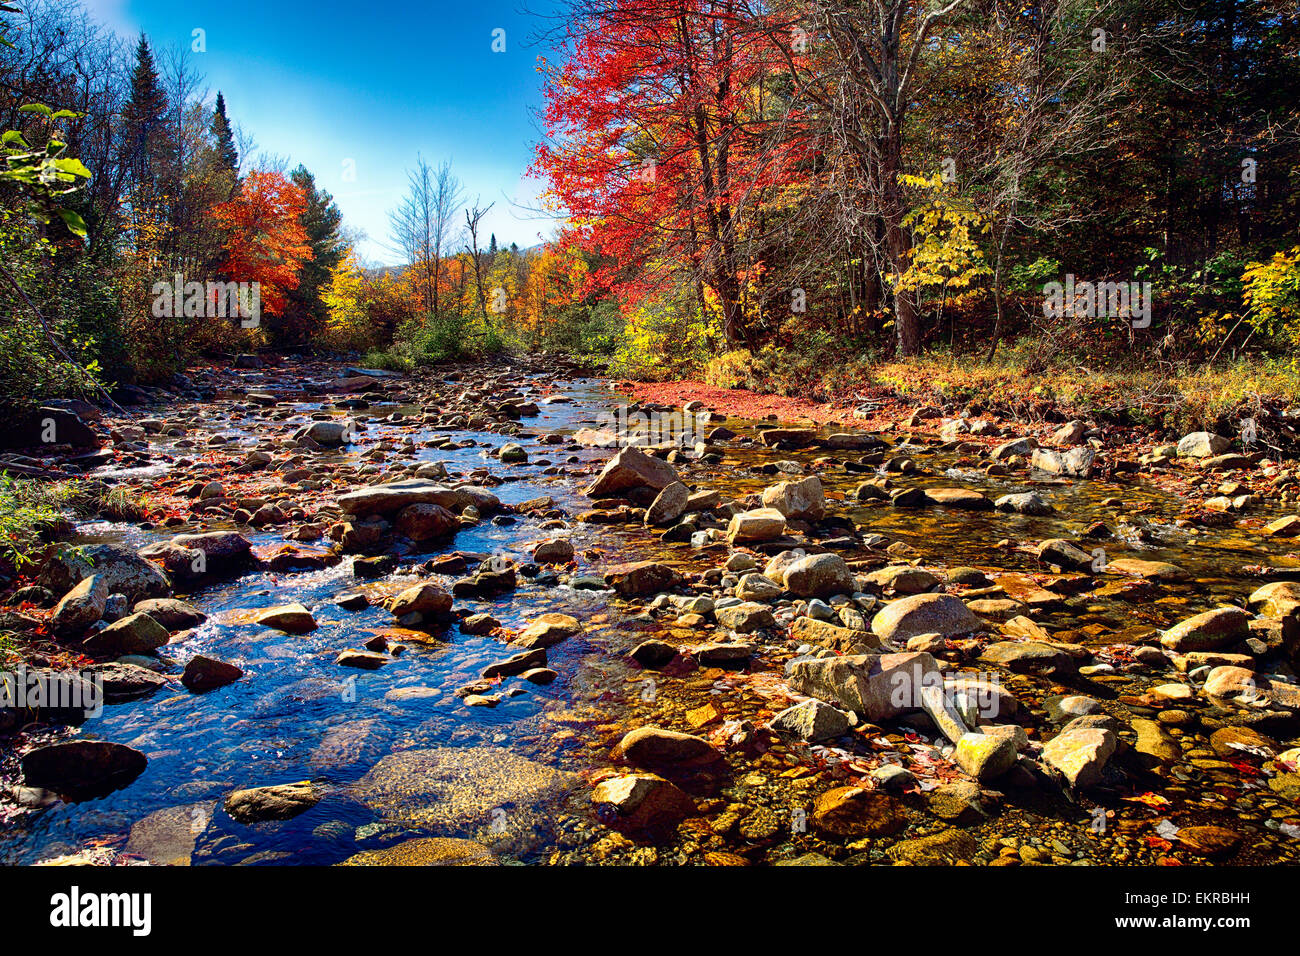 Low Angle View of a Rocky River Bed avec feuillage d'automne, Franconia, New Hampshire, USA Banque D'Images